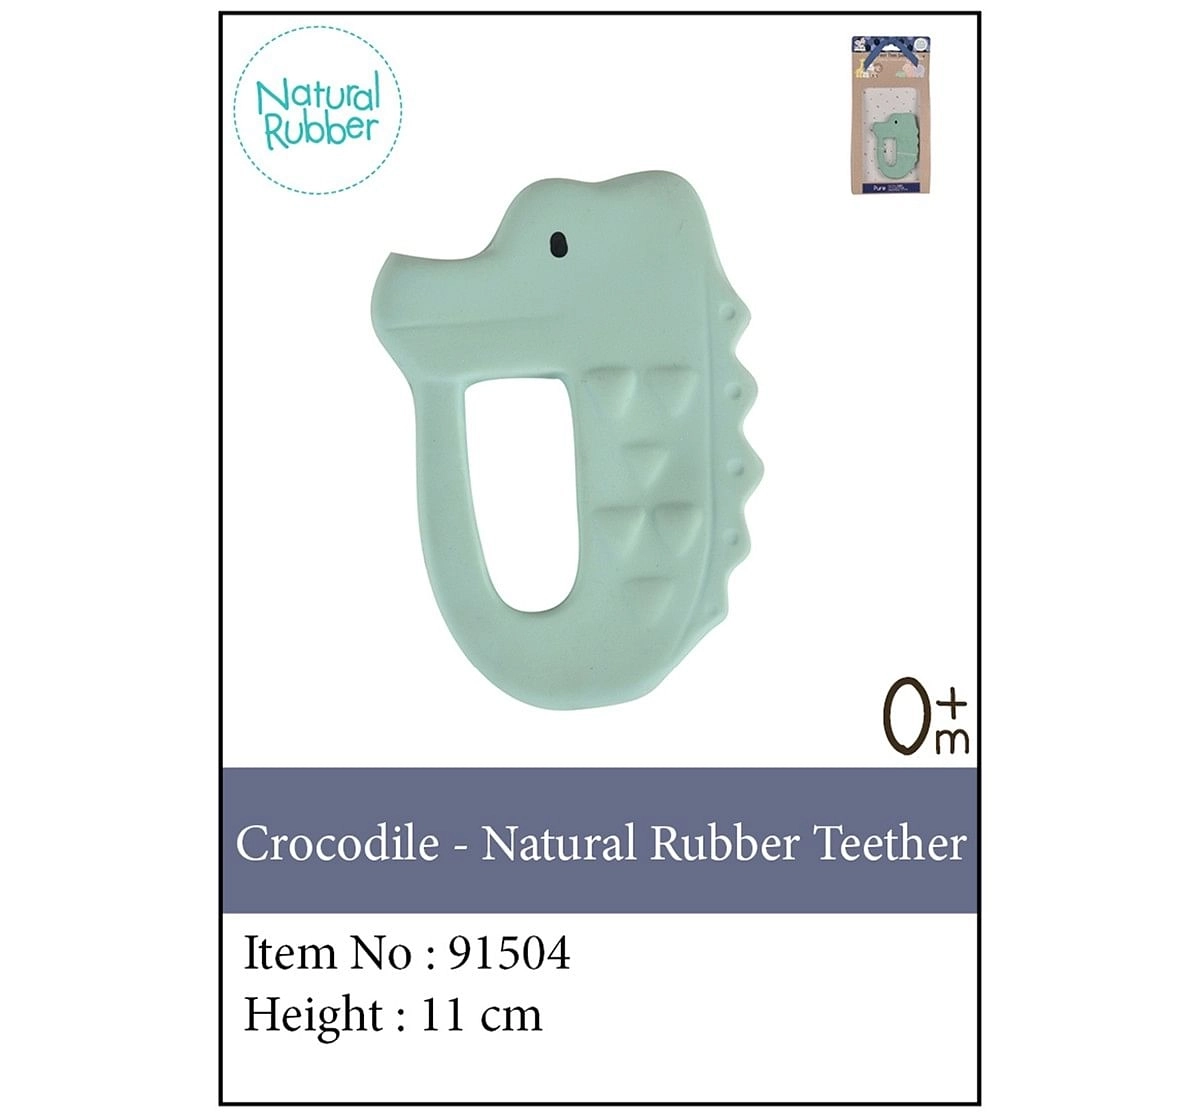 Crocodile Natural Rubber Teether for Kids age 0M+